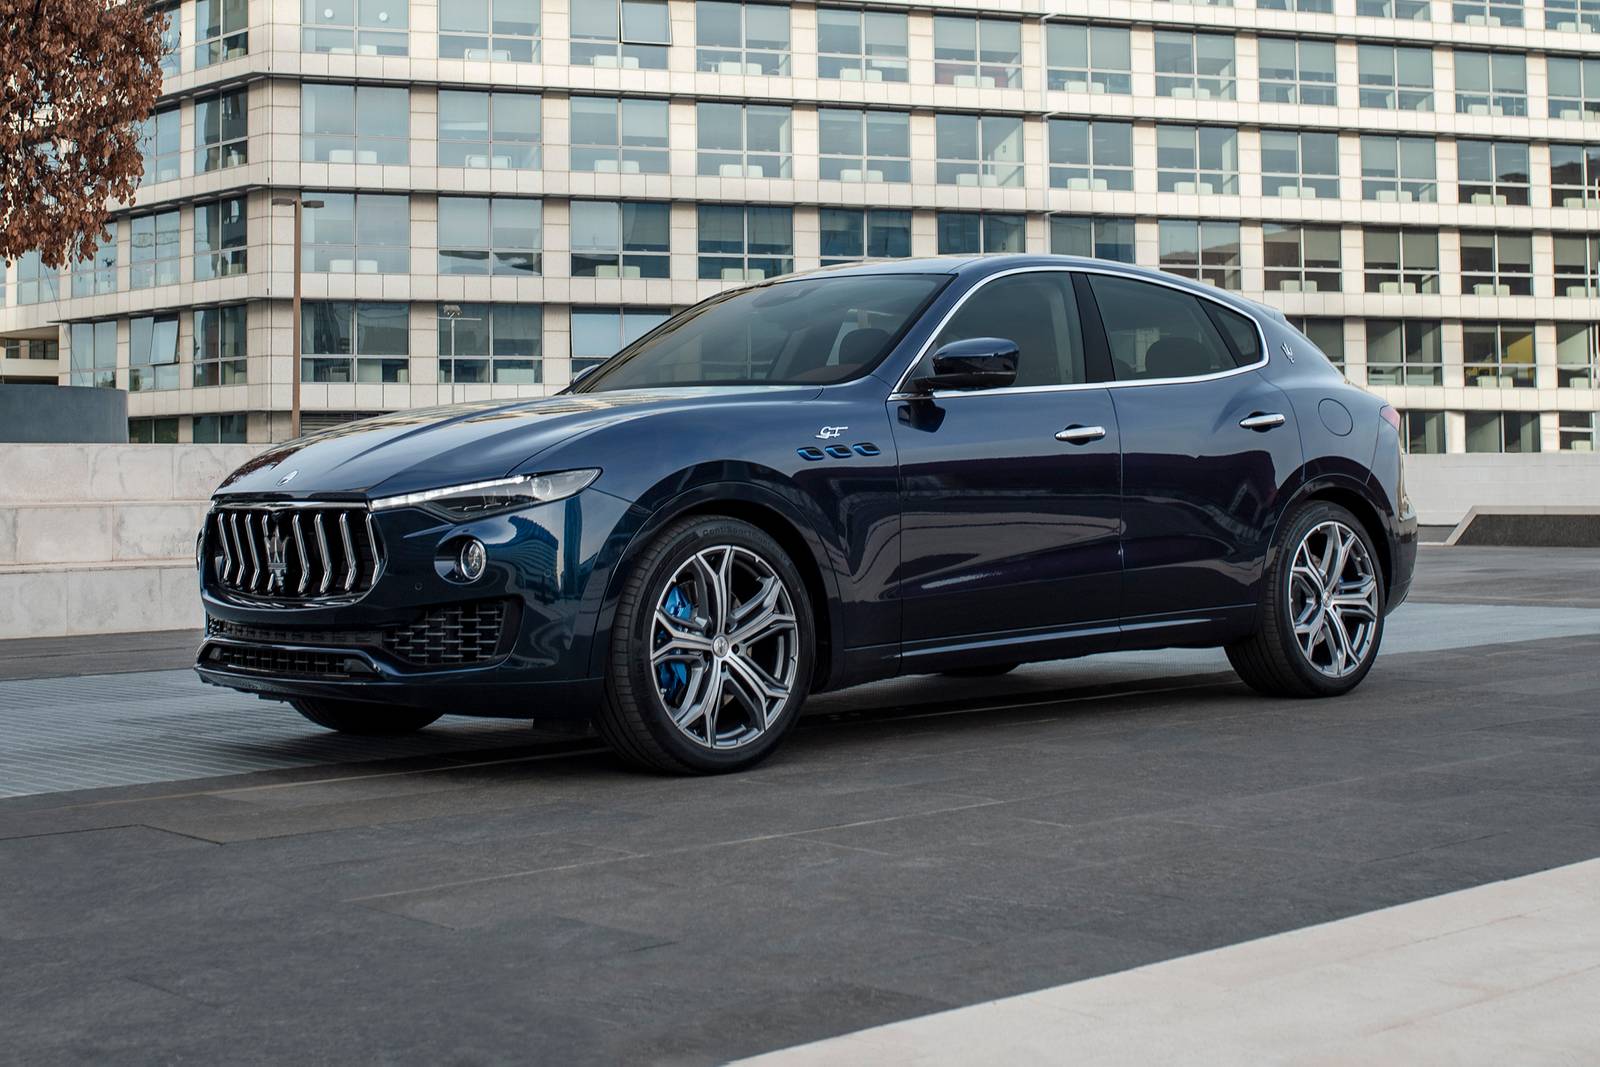 2022 Maserati Levante Prices, Reviews, and Pictures | Edmunds